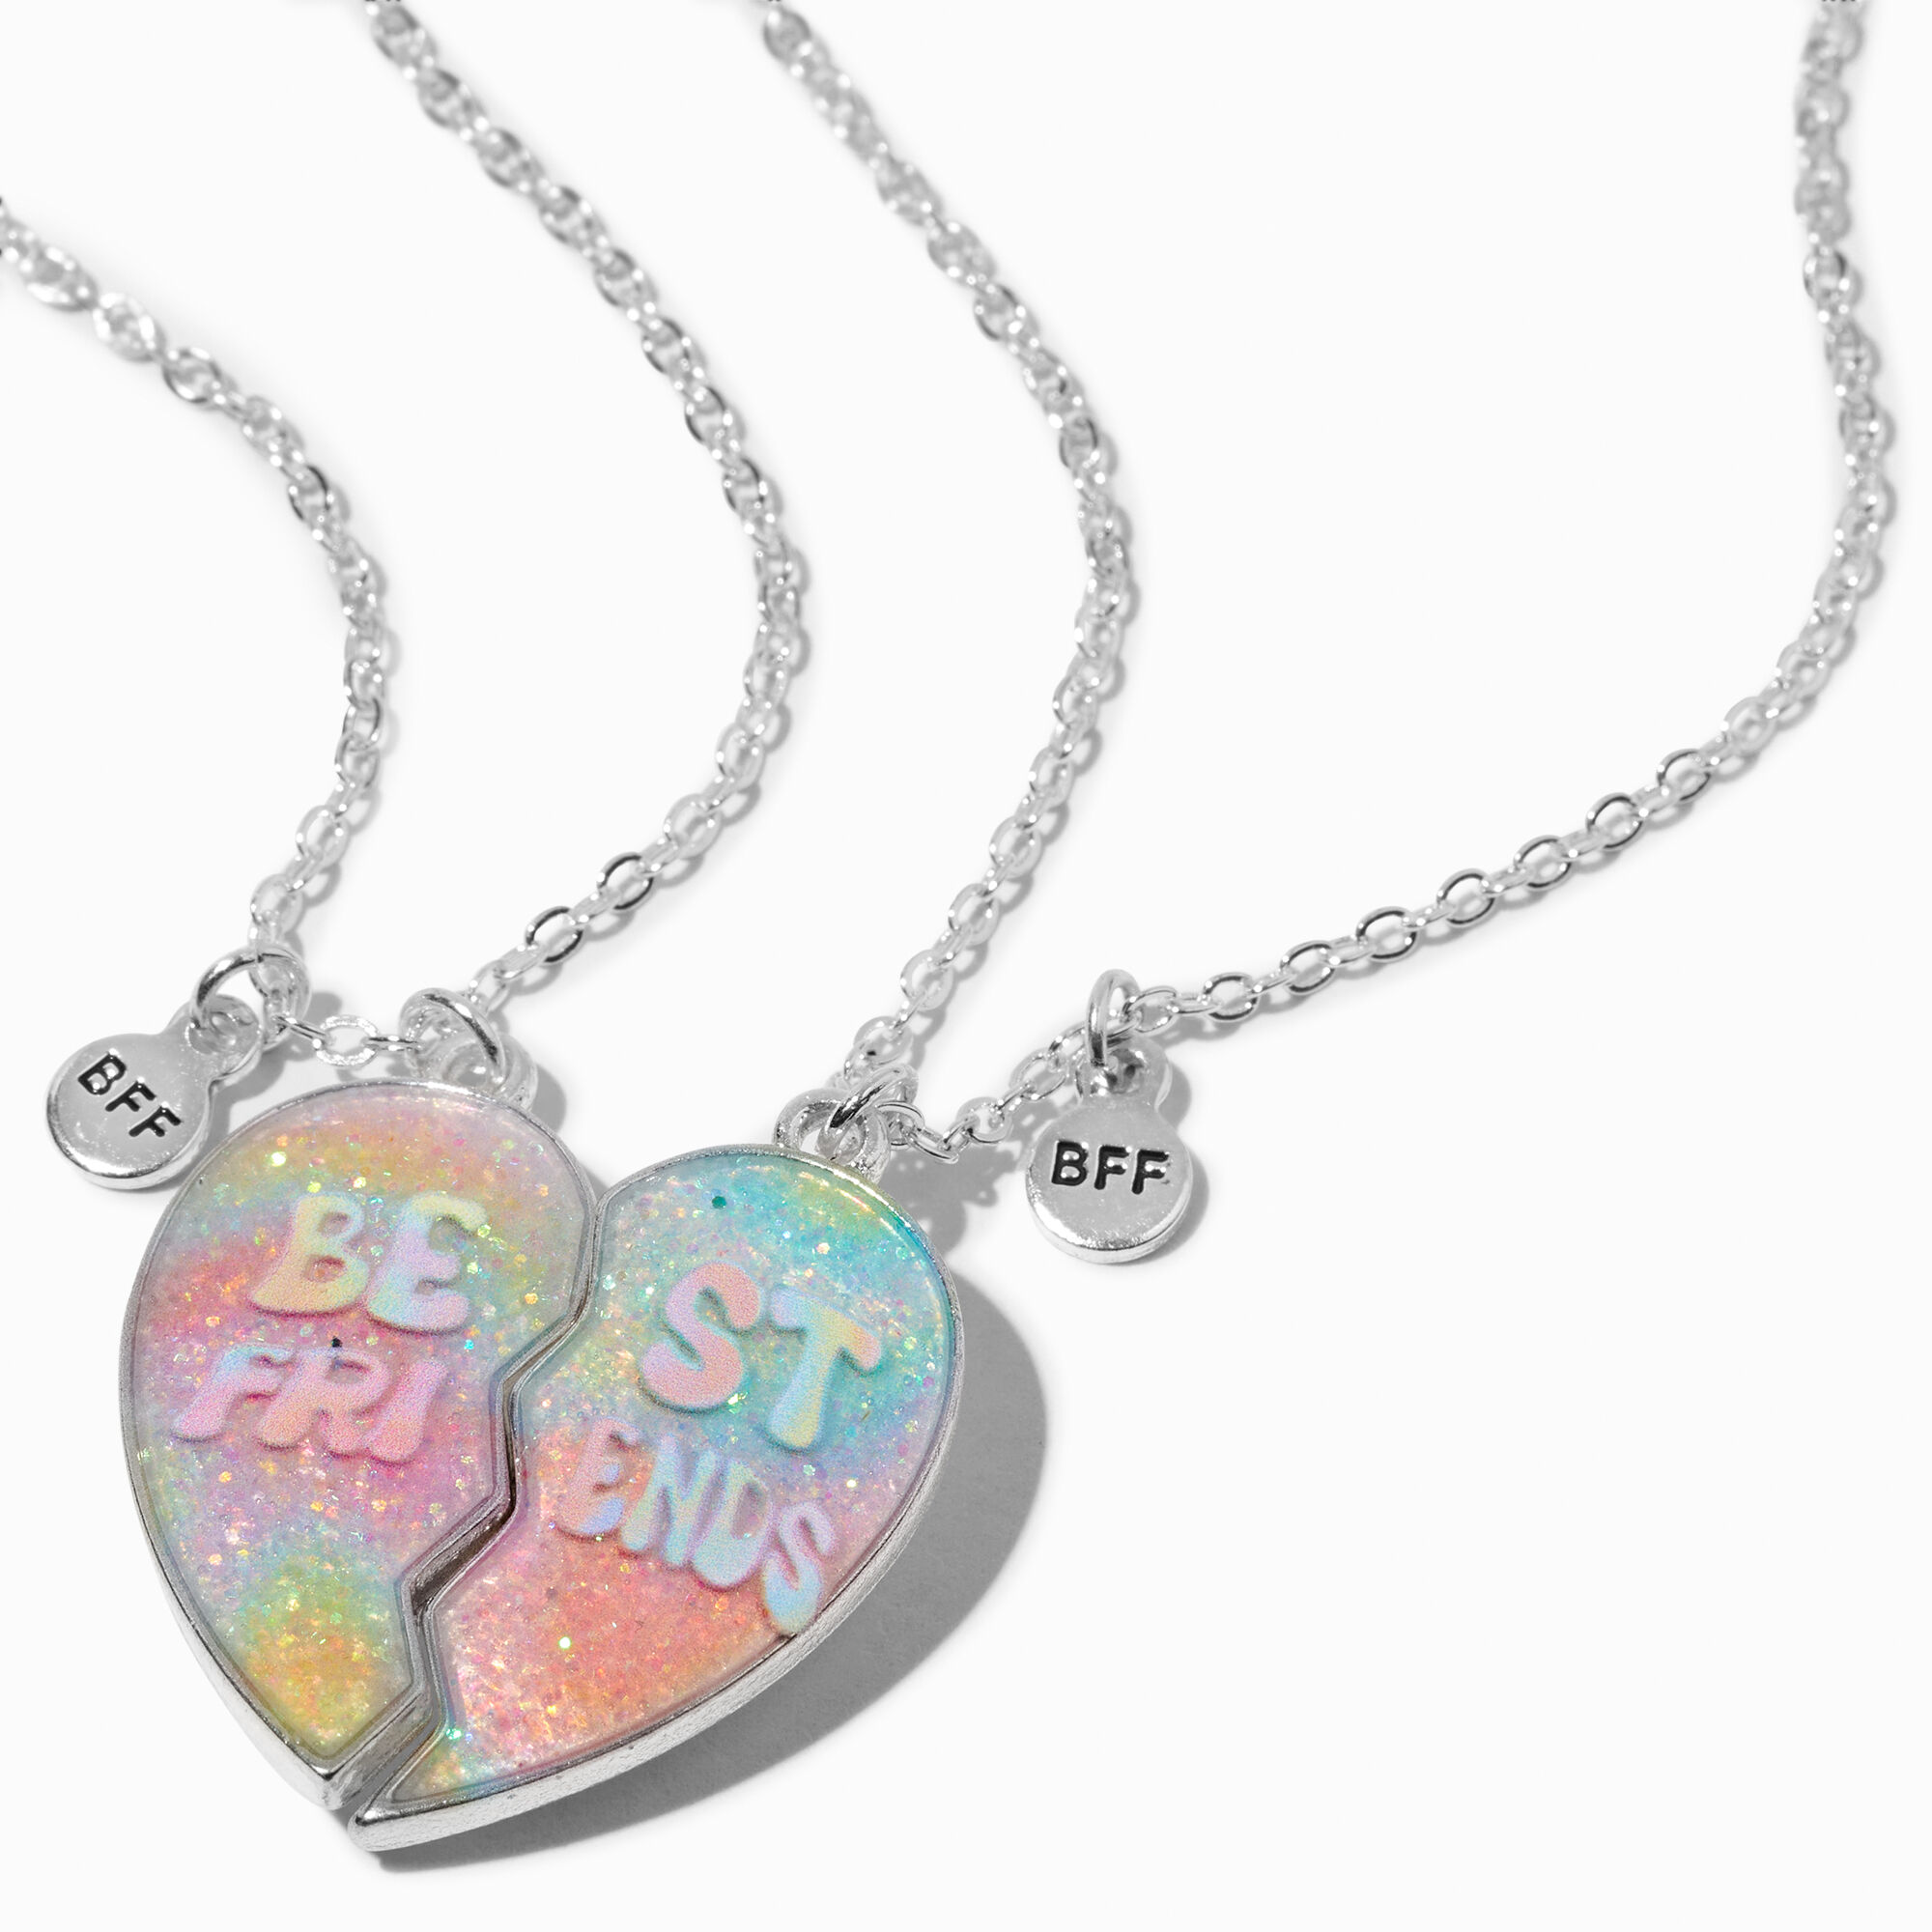 View Claires Best Friends Glitter Groovy Split Heart Pendant Necklaces 2 Pack Silver information